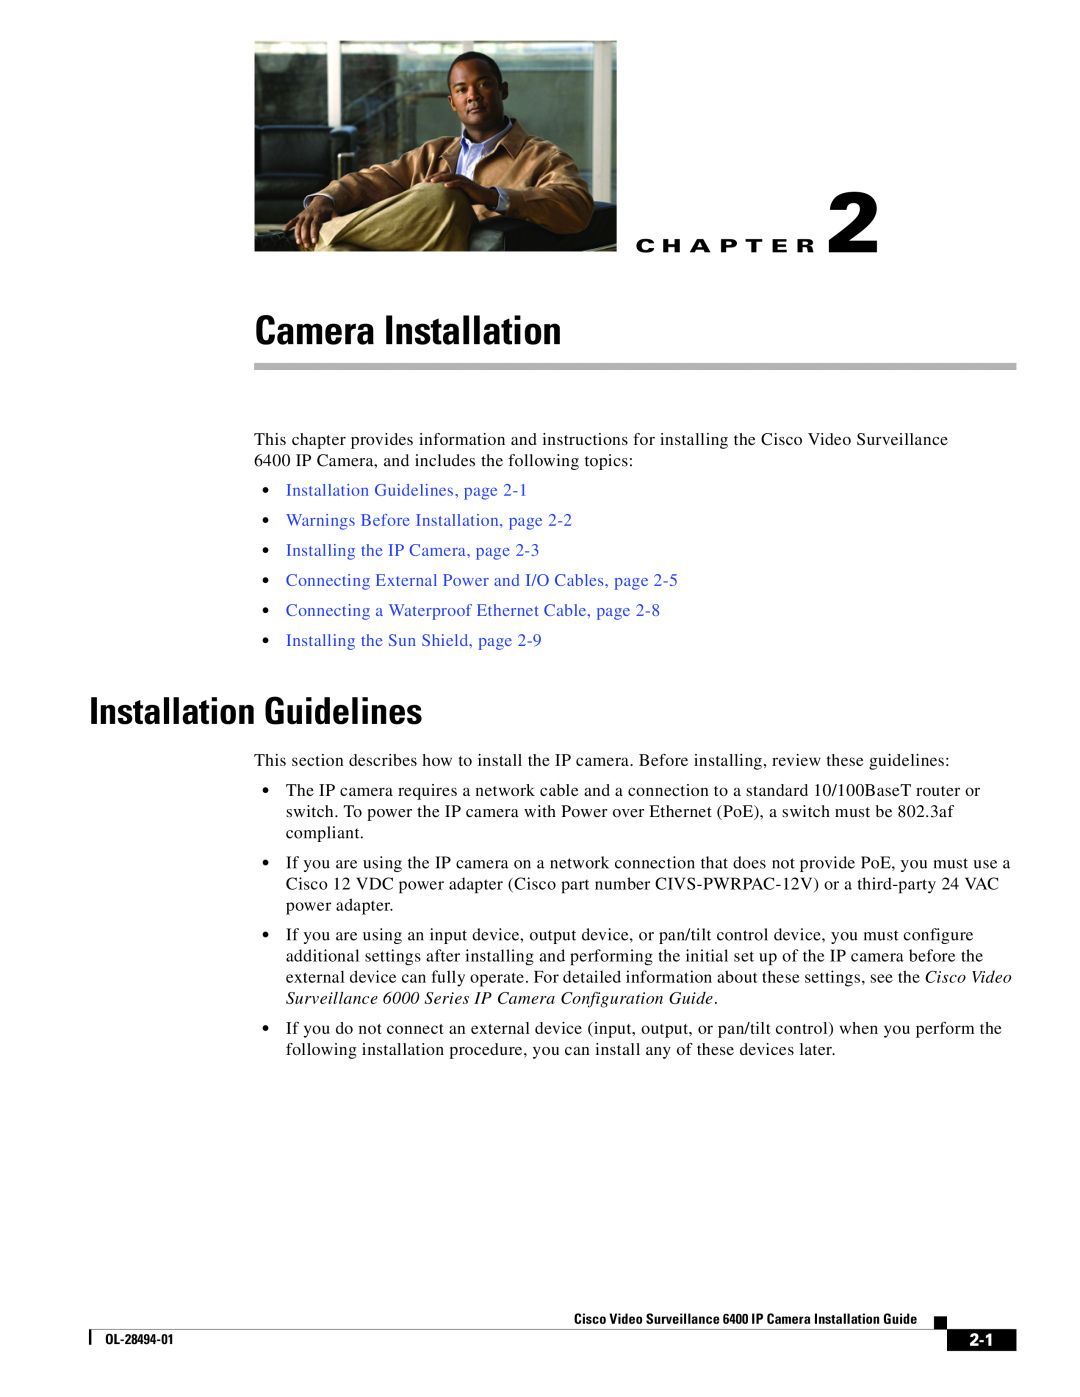 Cisco Systems 6400 manual Camera Installation, Installation Guidelines, Installing the IP Camera, page, C H A P T E R 